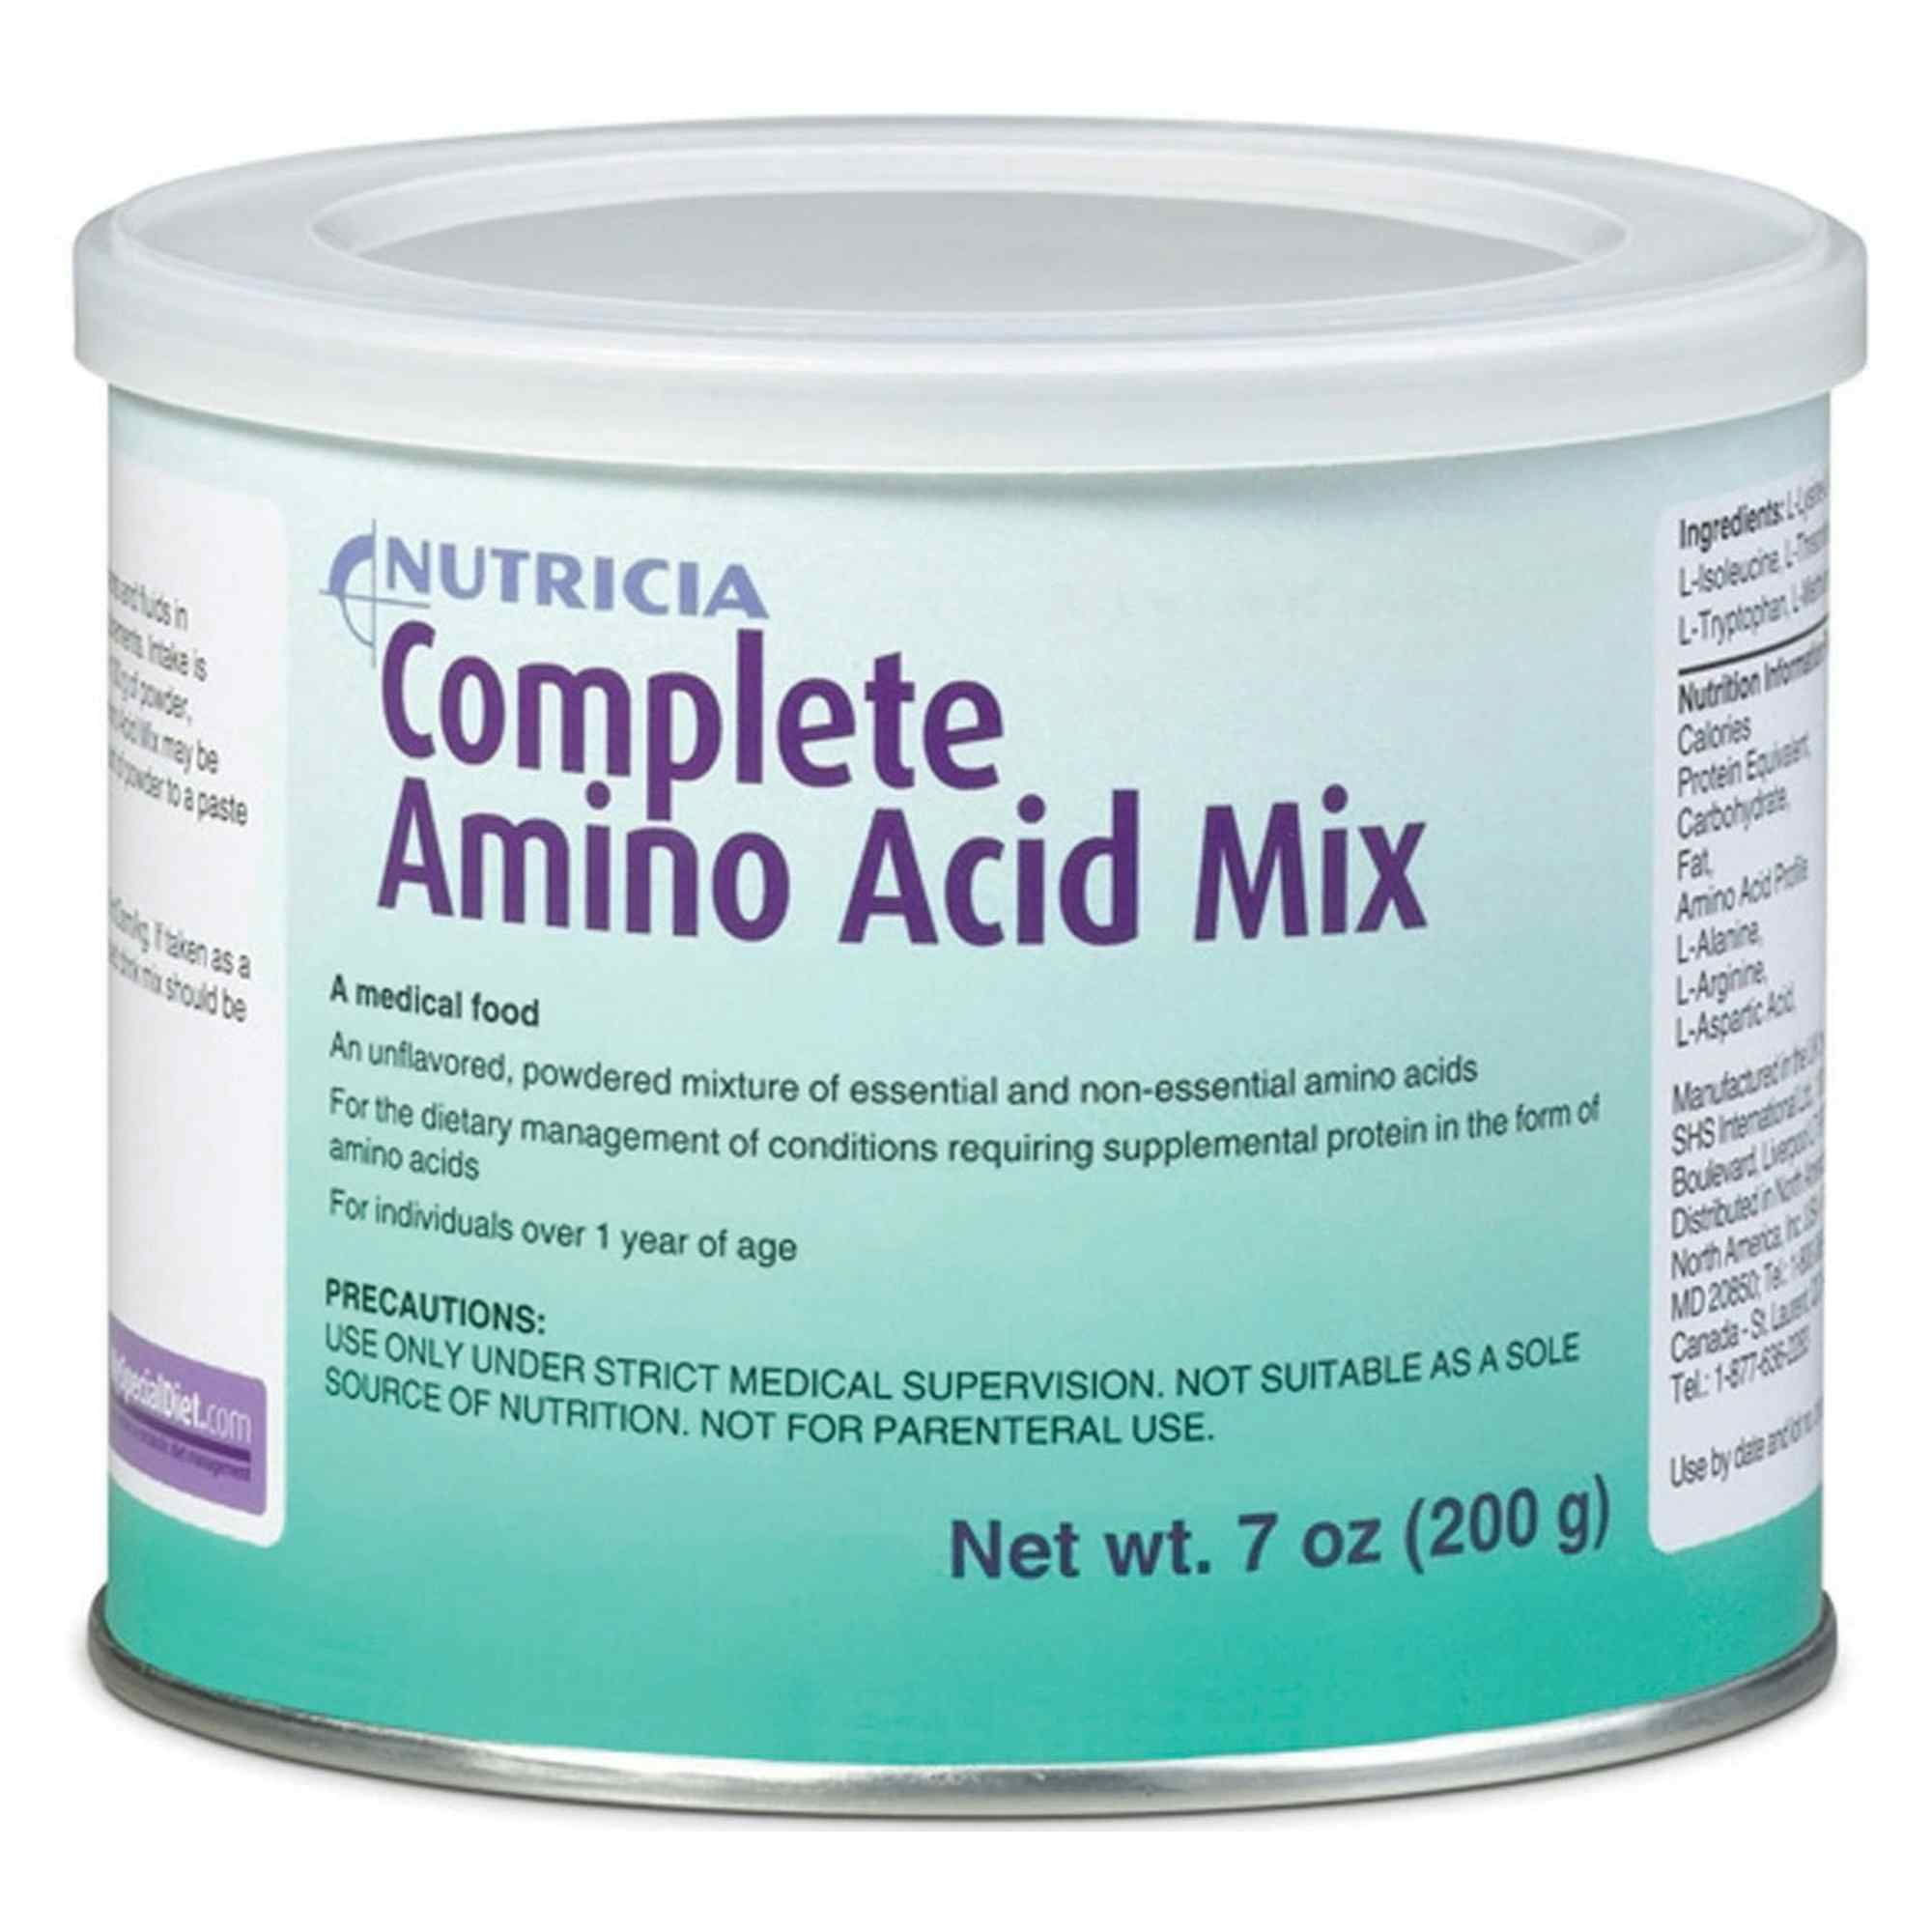 Nutrica Complete Amino Acid Oral Supplement, Unflavored, 53341, 7 oz. - 1 can